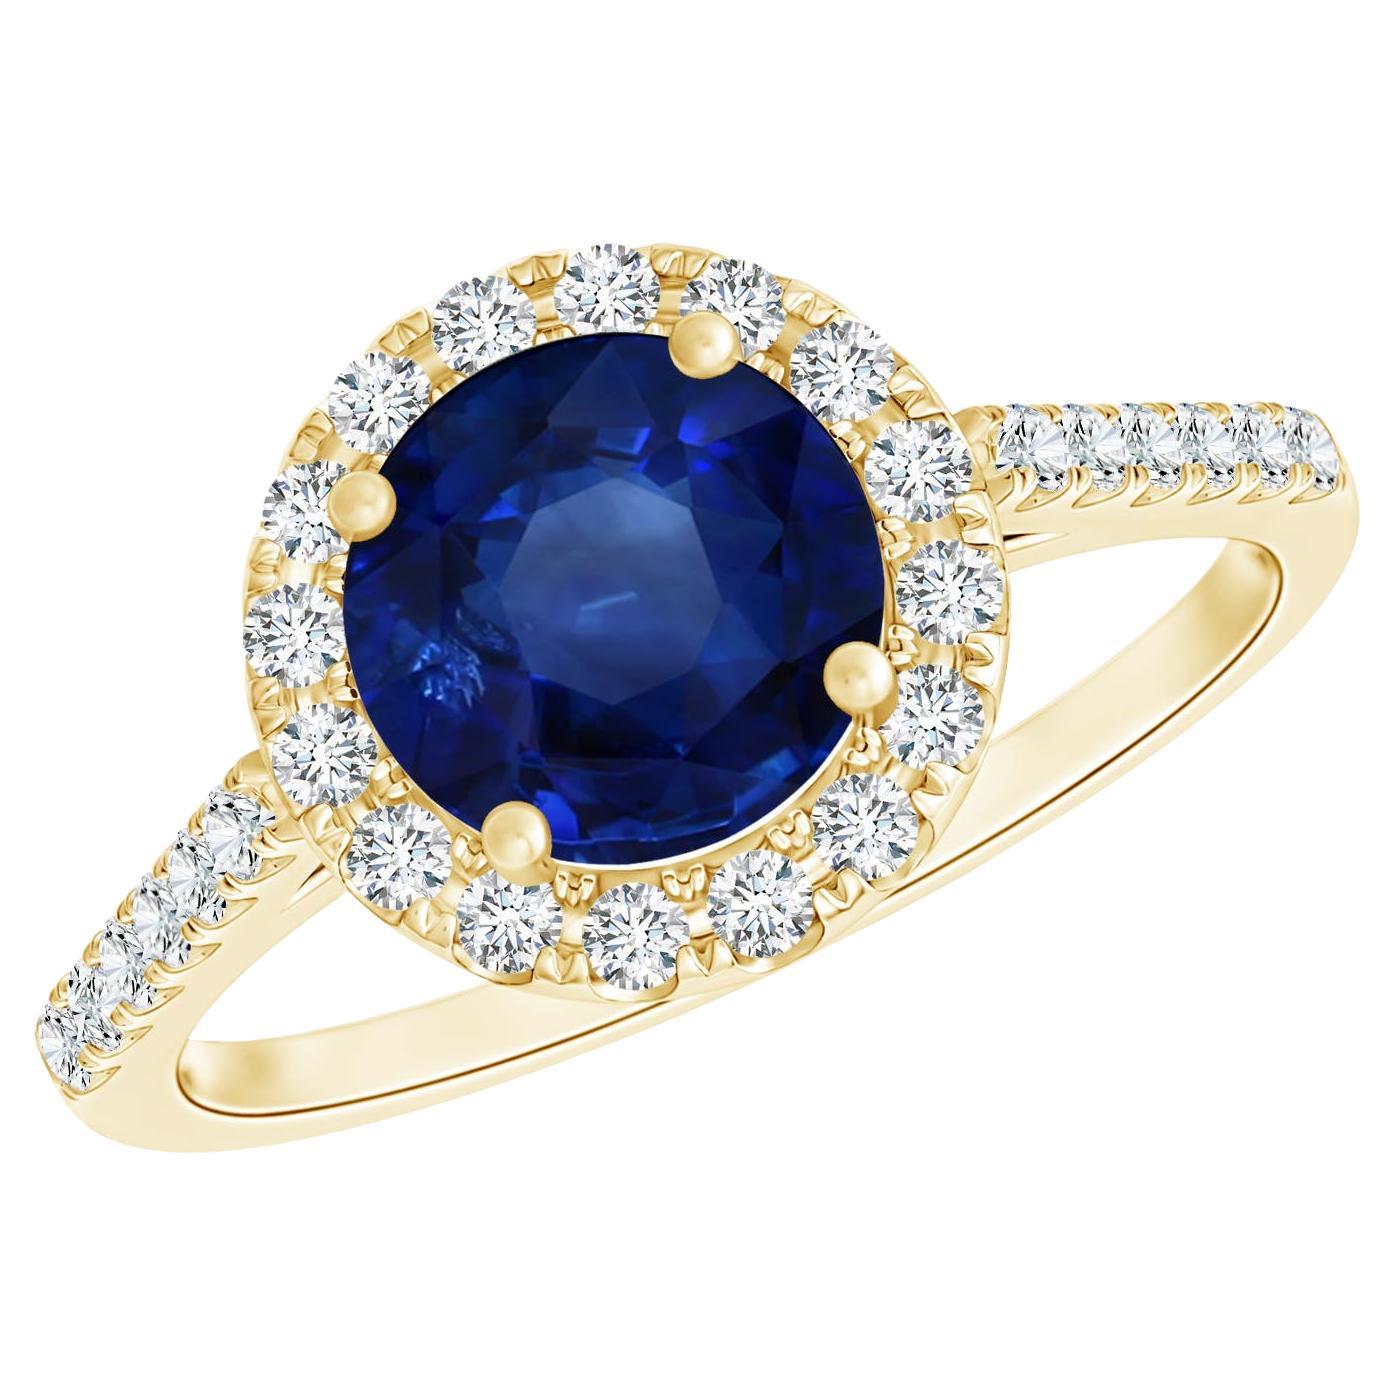 For Sale:  Angara Gia Certified Natural Round Sapphire Yellow Gold Ring with Diamond Halo